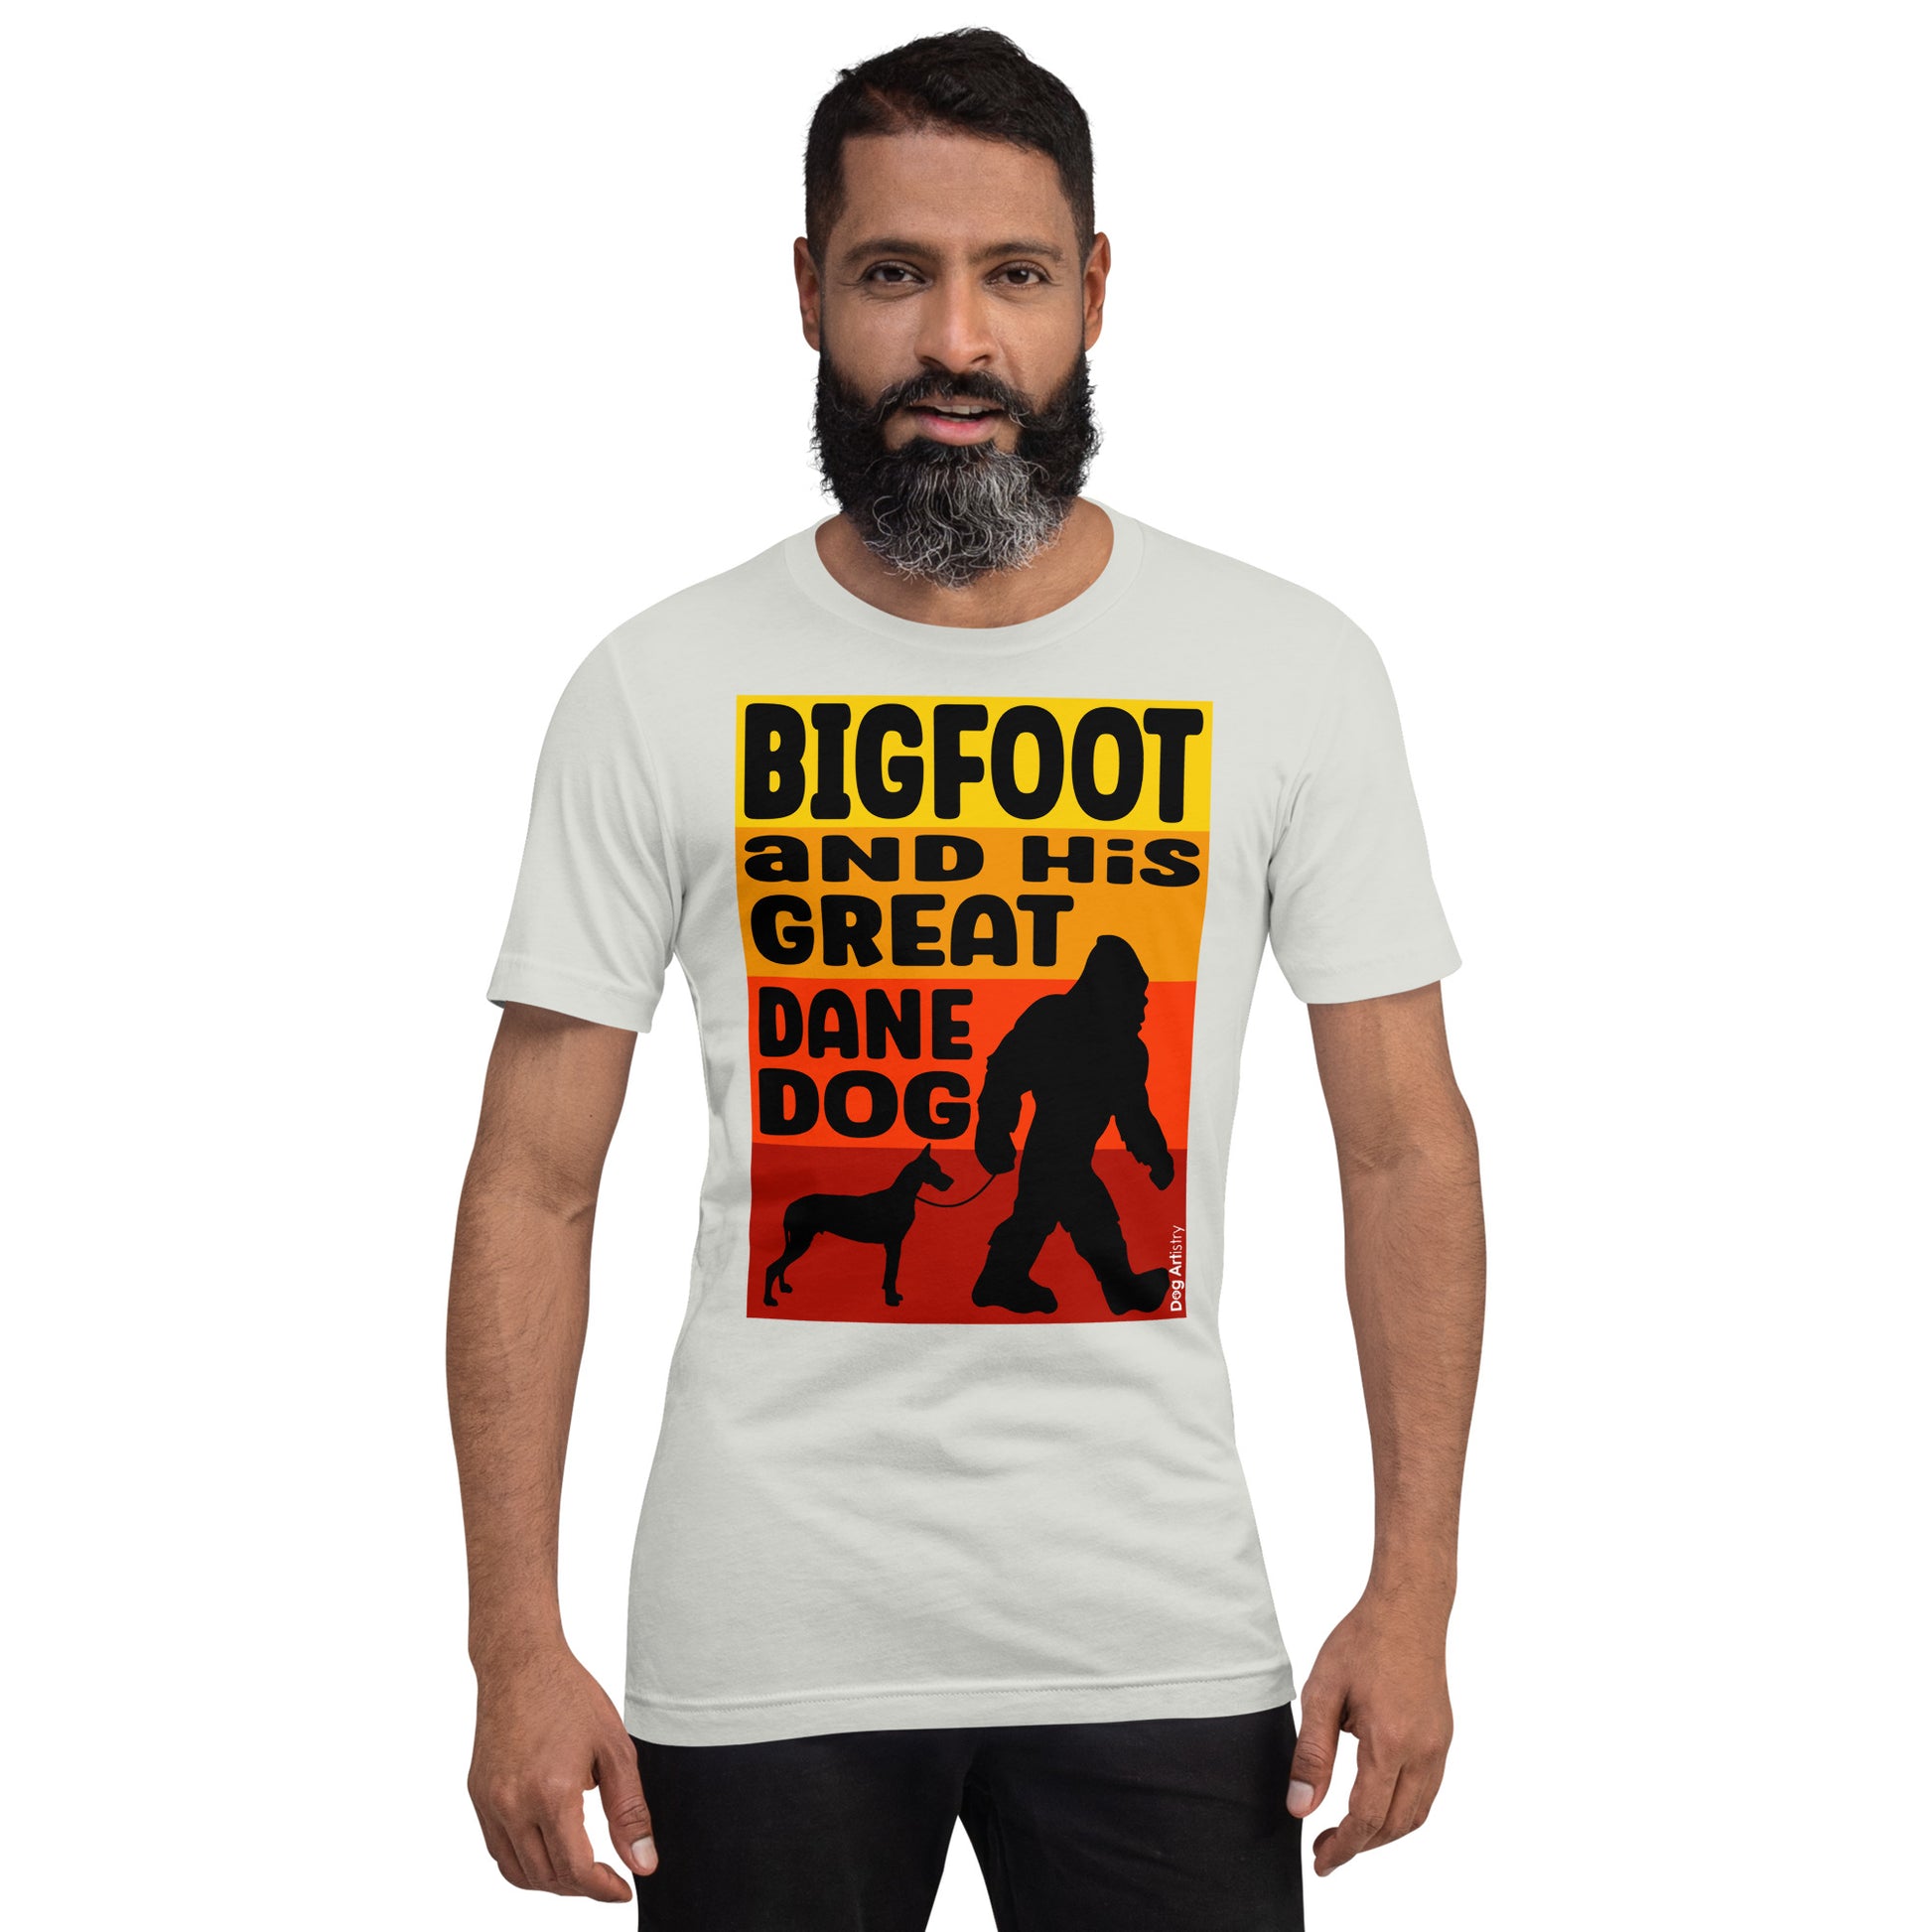 Bigfoot and his Great Dane unisex silver t-shirt by Dog Artistry.